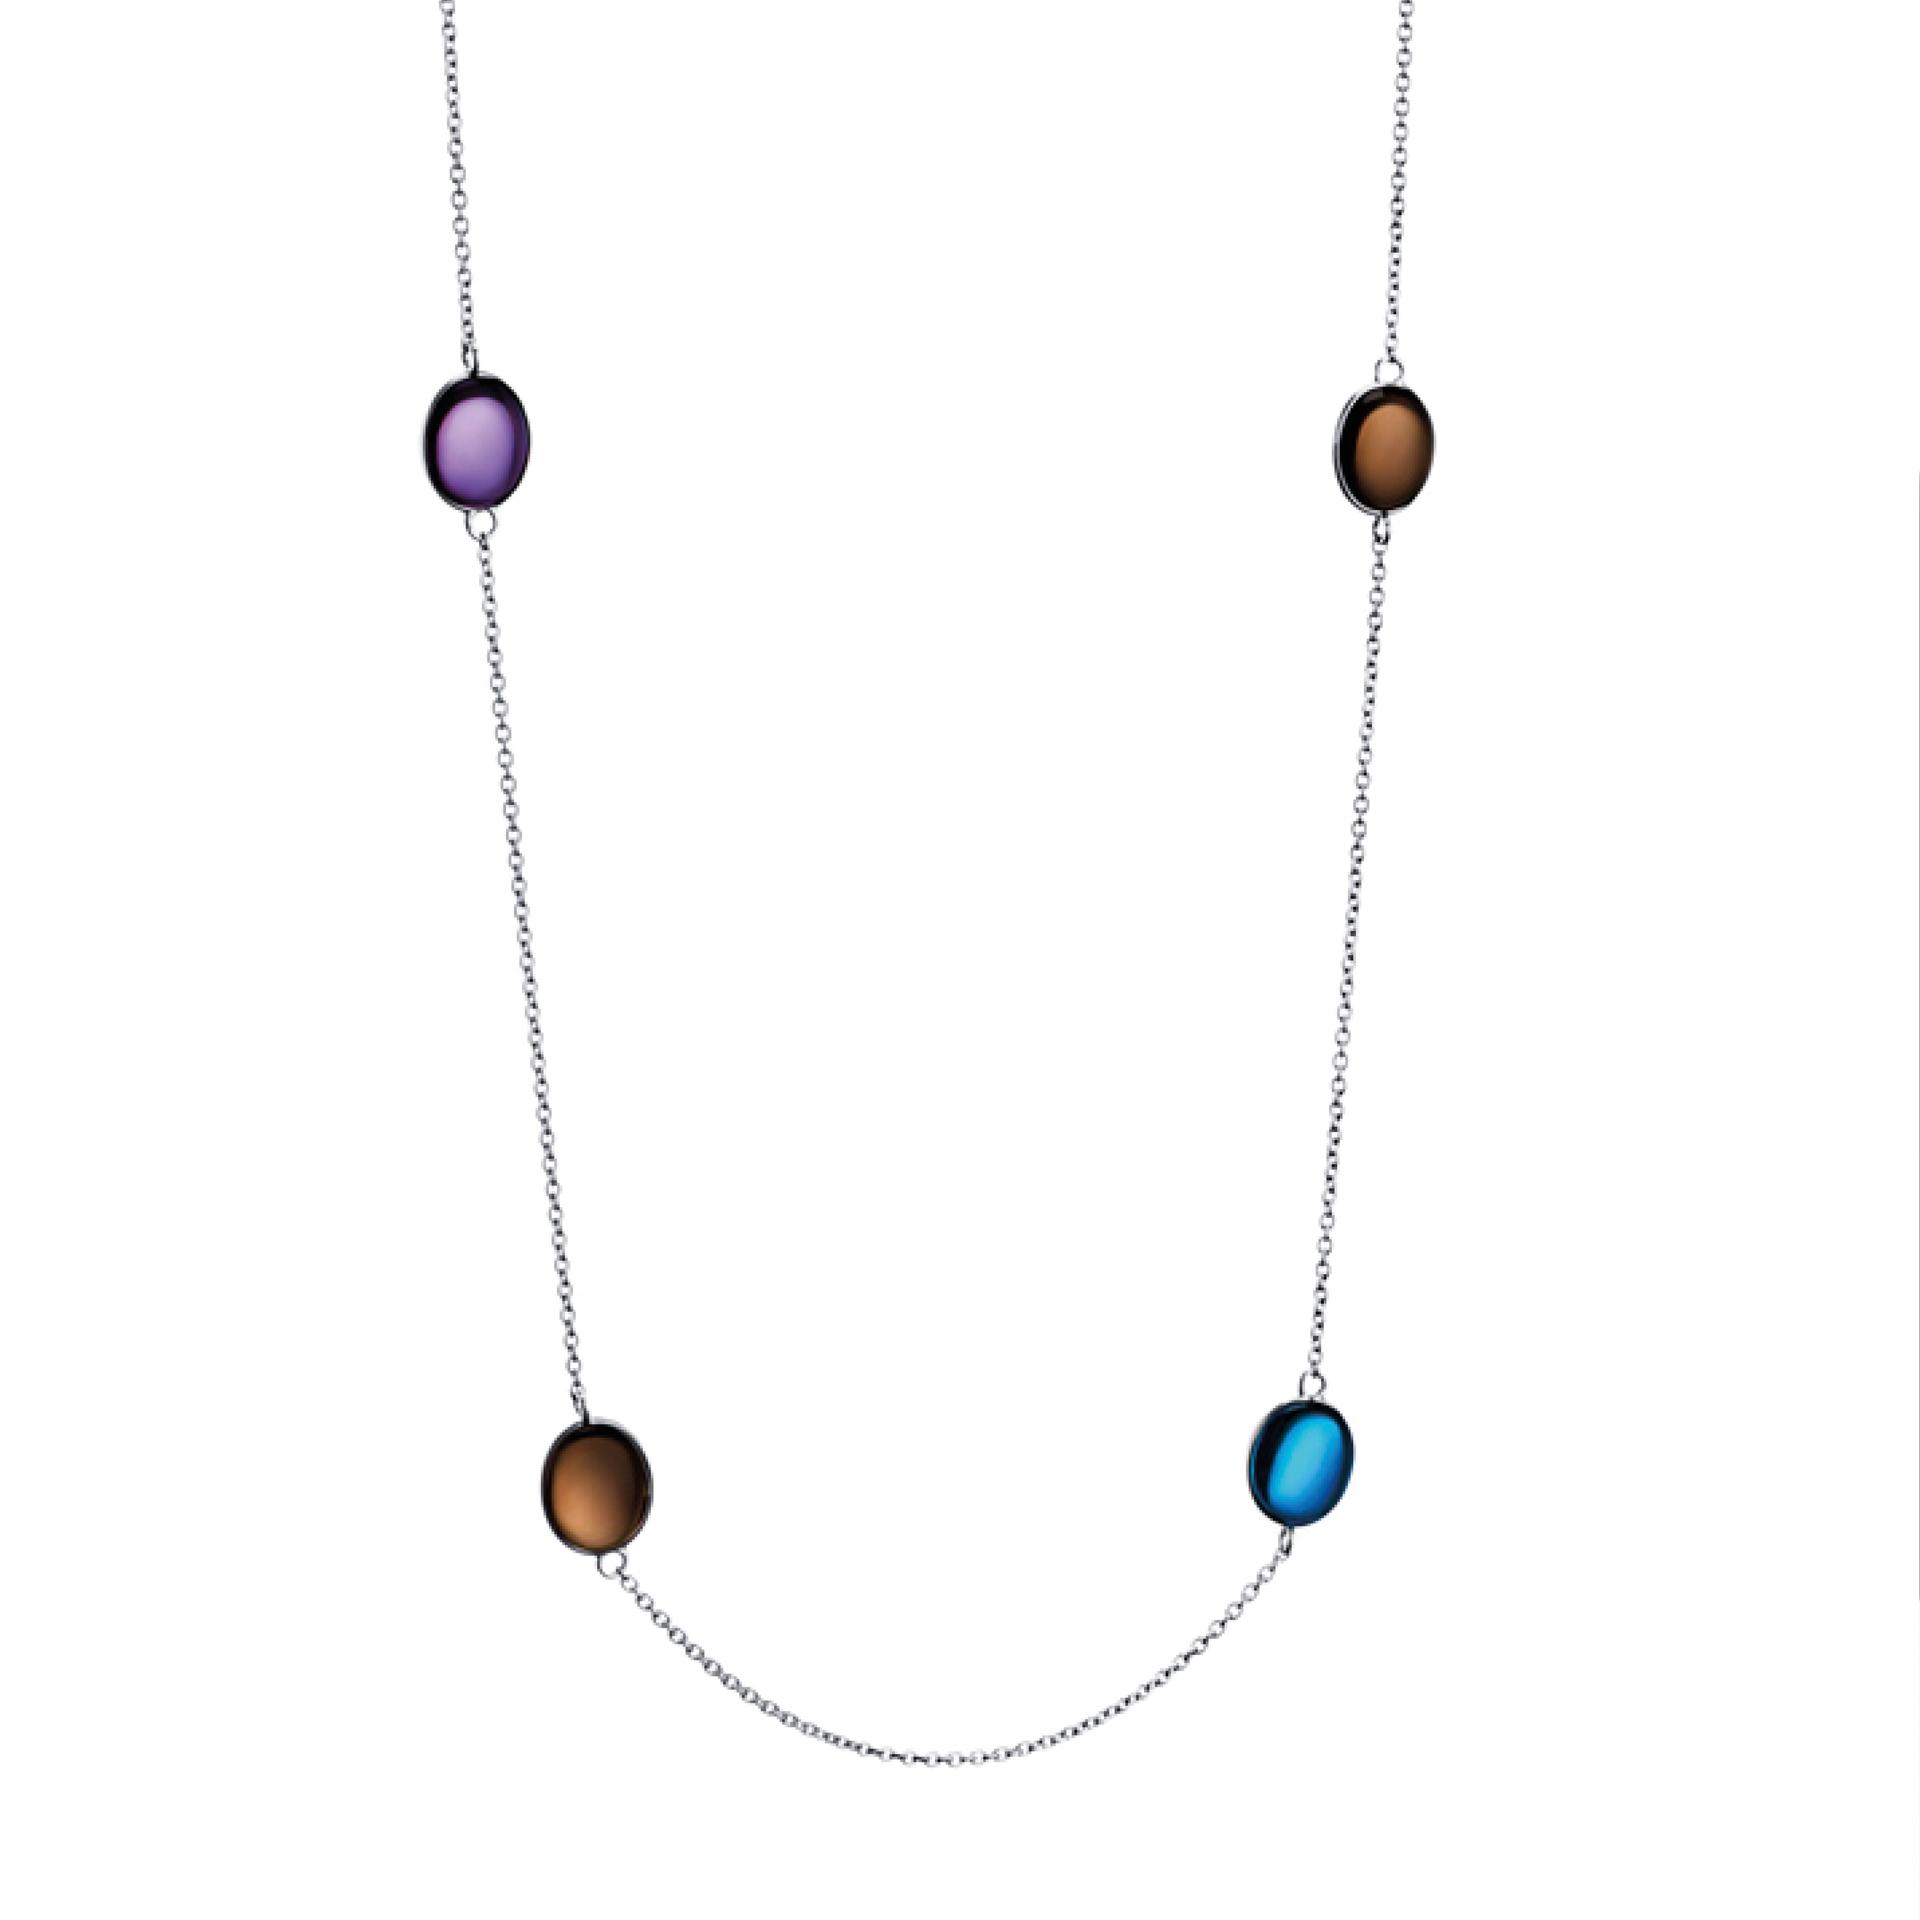 COLOUR MY WORLD NECKLACE.